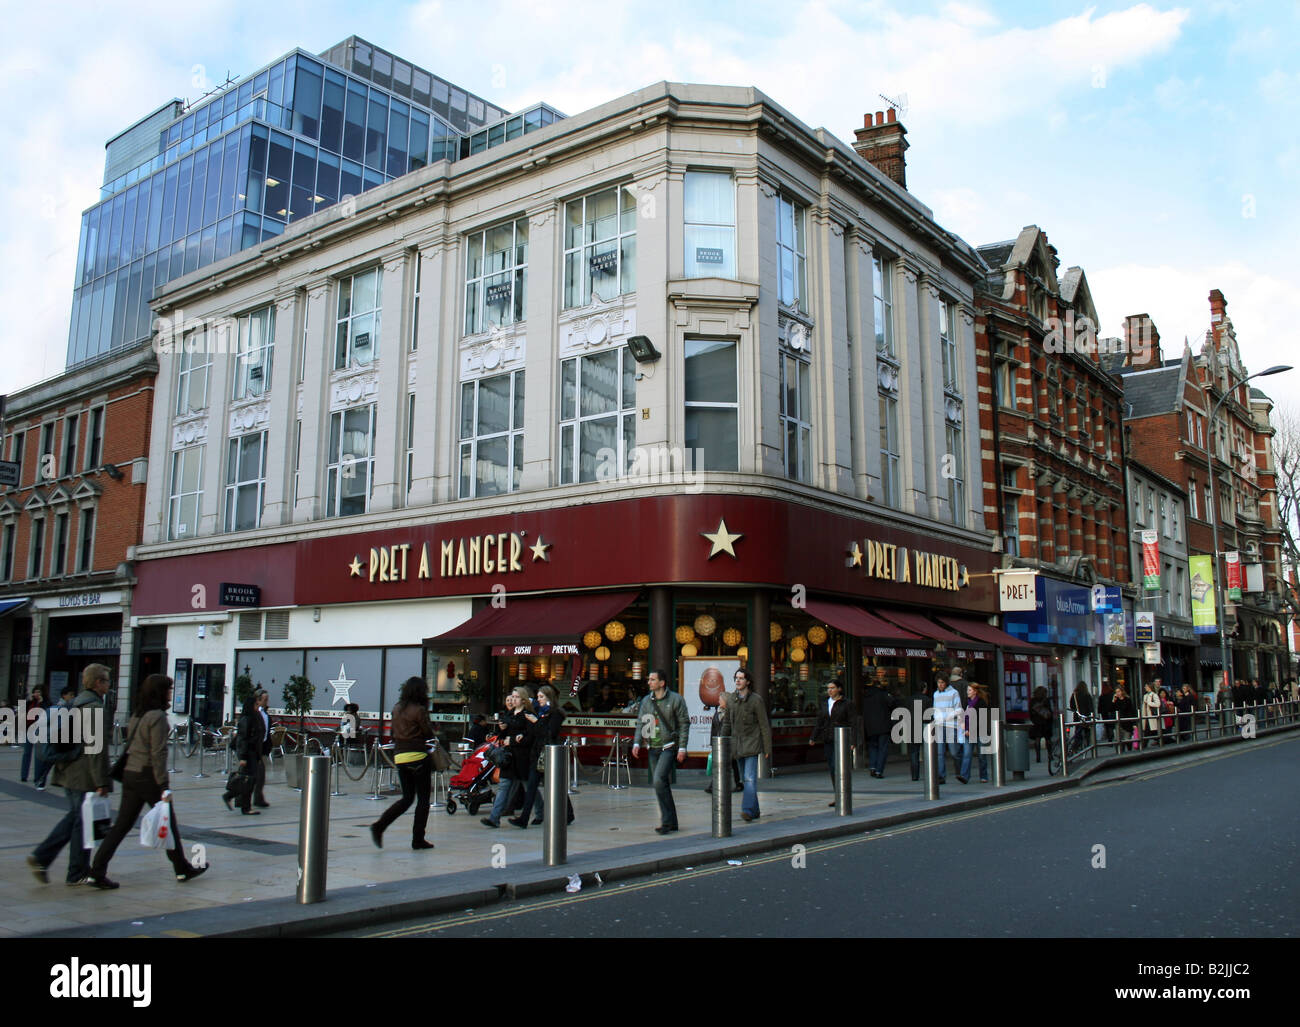 Hammersmith pret a manager store Stock Photo